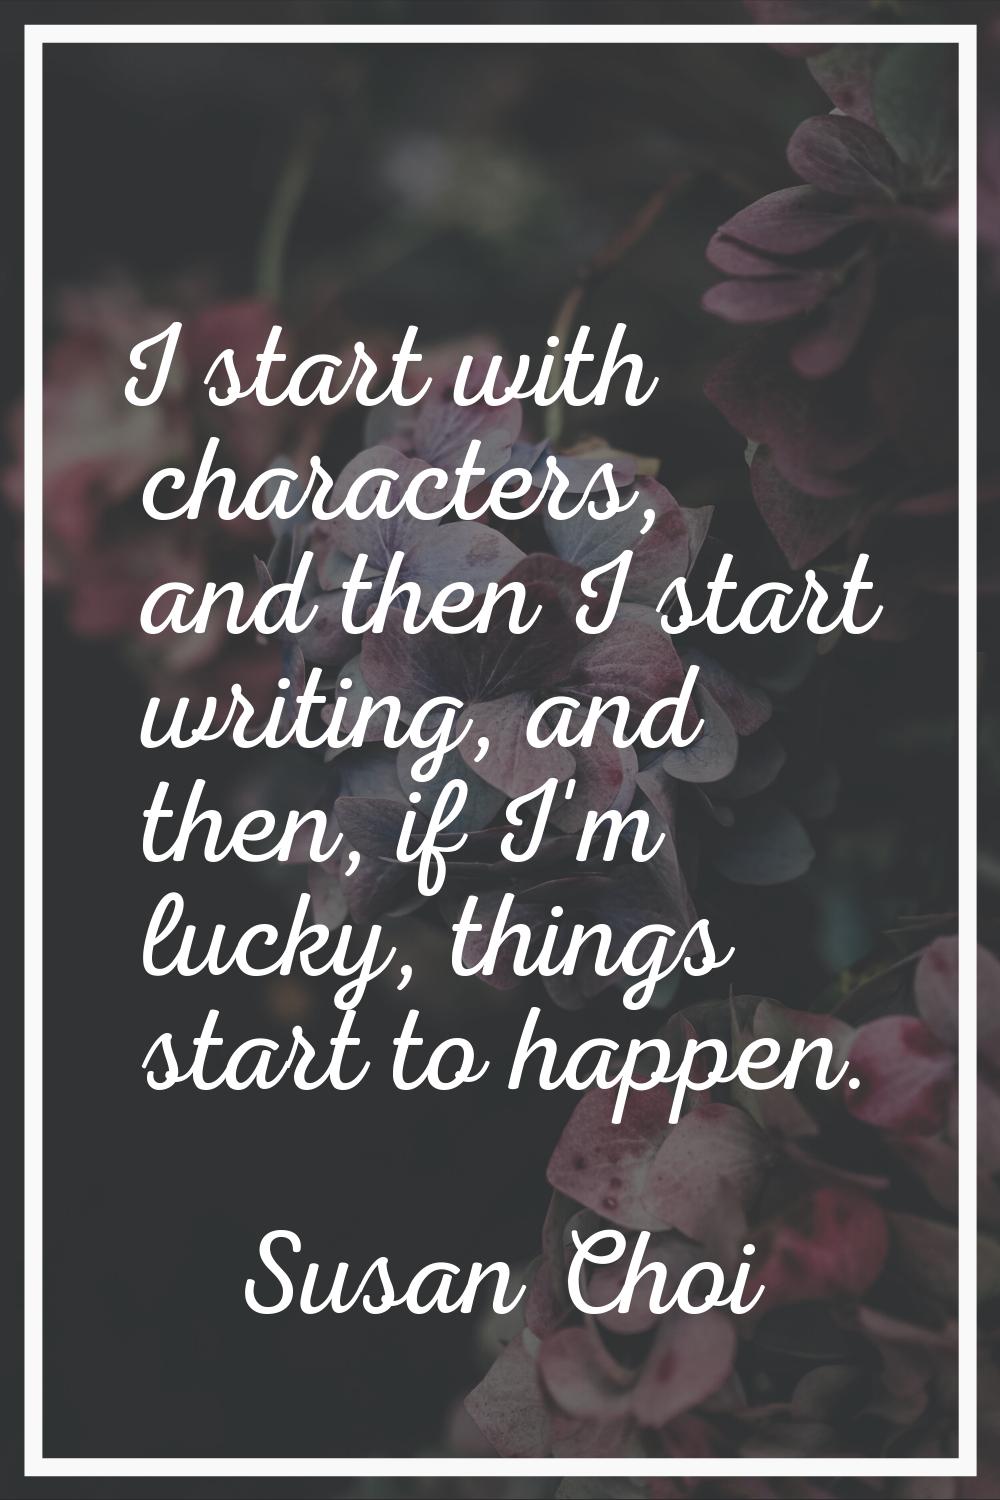 I start with characters, and then I start writing, and then, if I'm lucky, things start to happen.